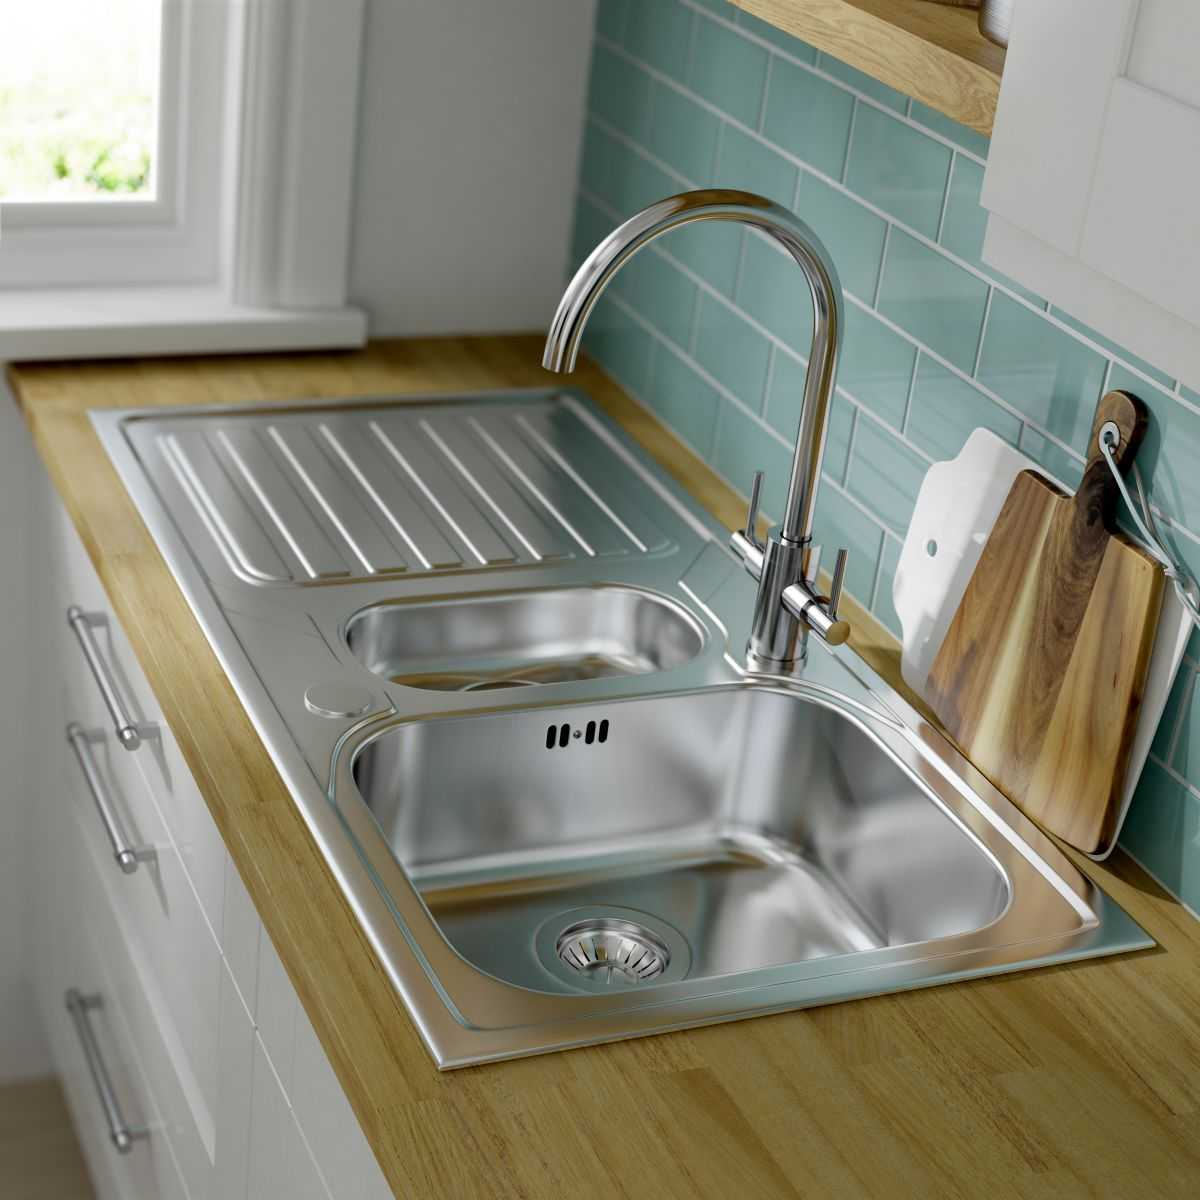 Can I change the color of my stainless steel sink